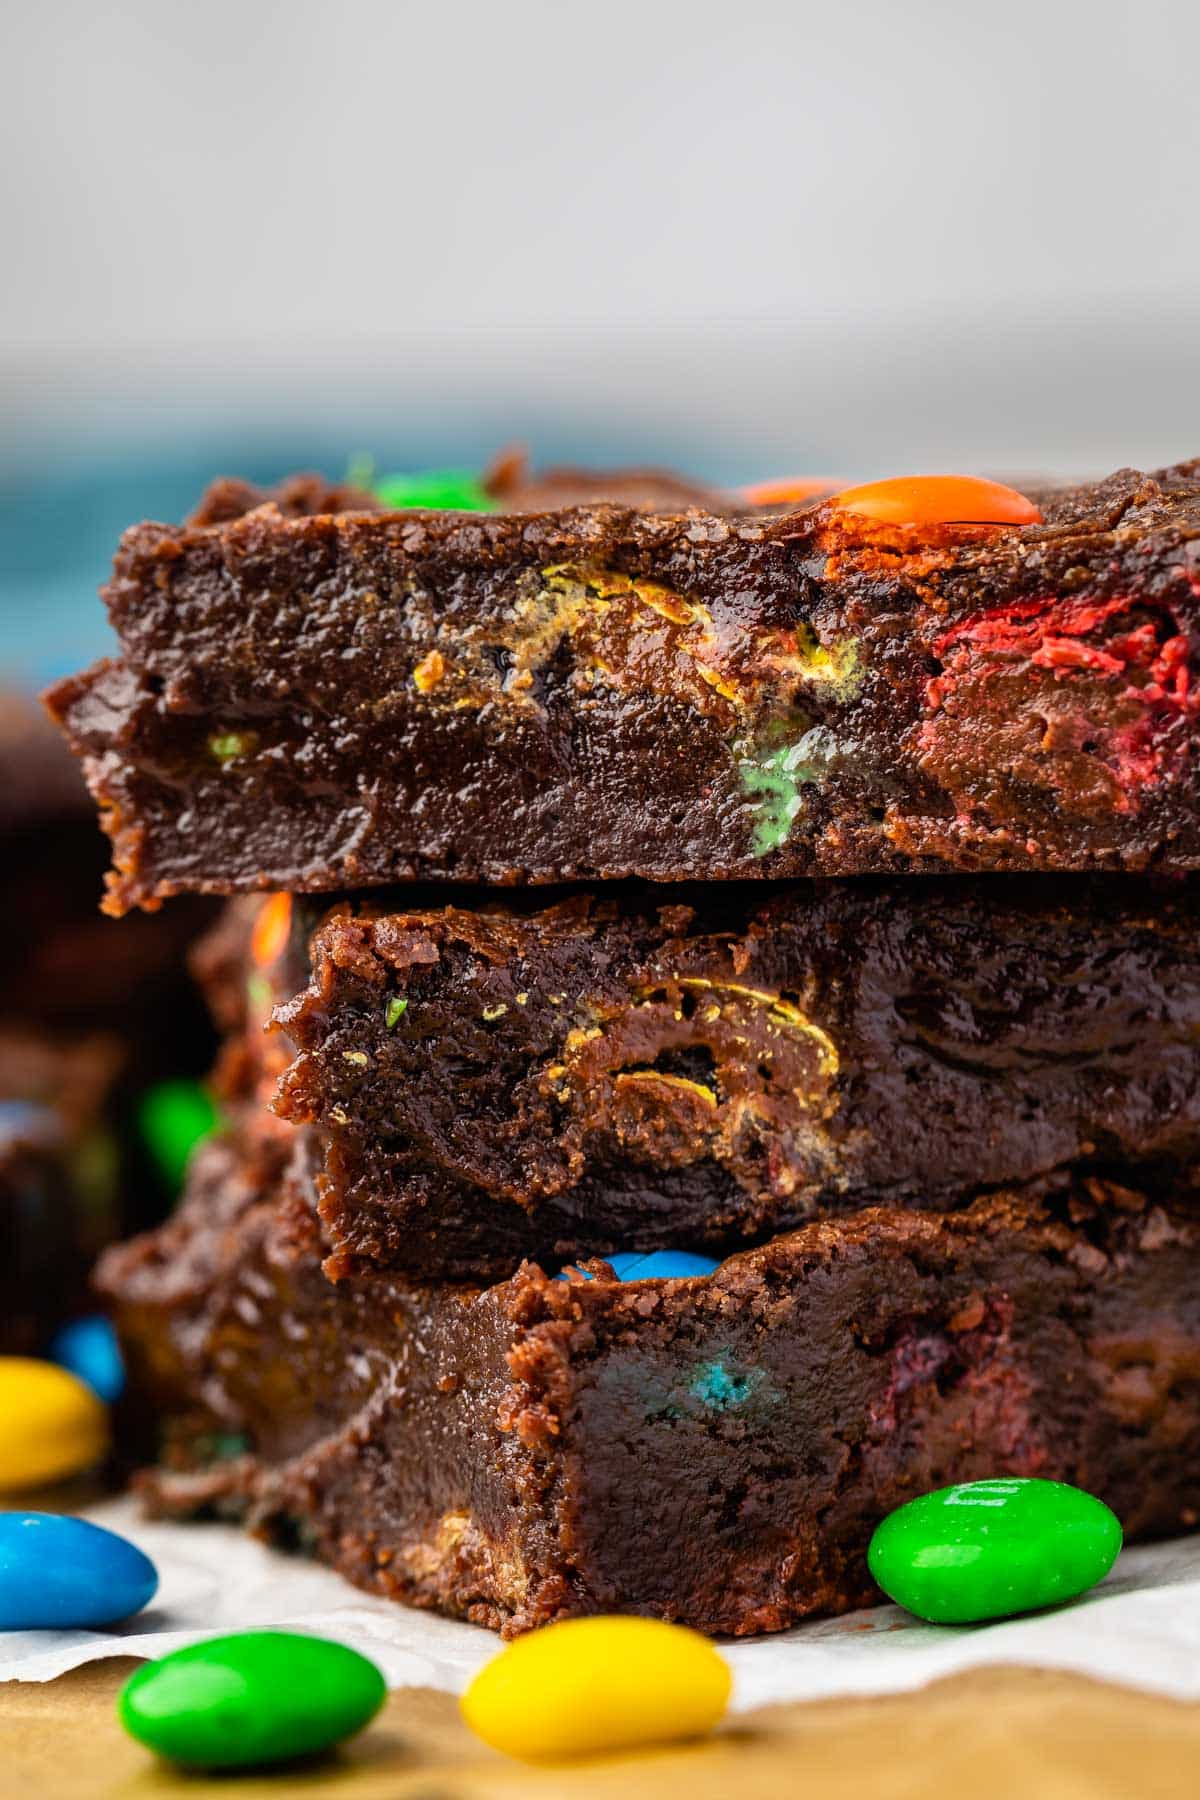 Fudge Brownie M&M'S  Don't need an oven for these ooey gooey